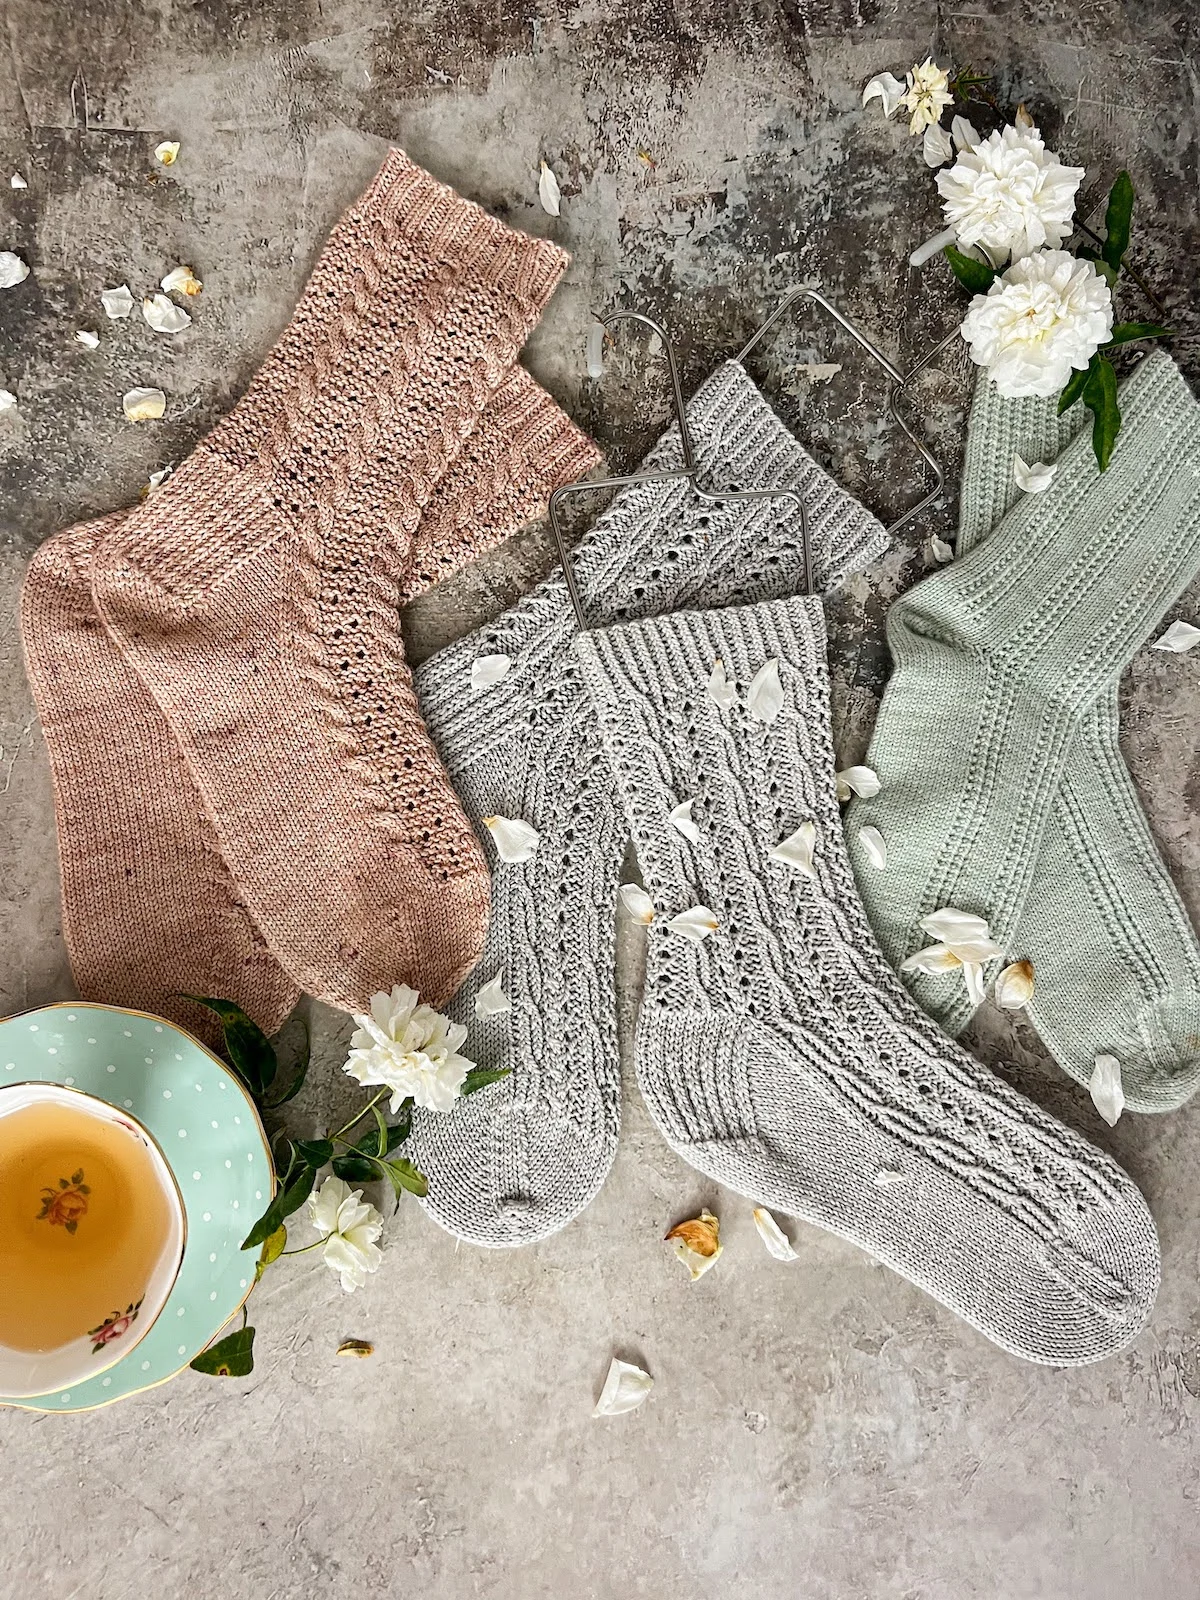 A flatlay photo showing a pair of pink cabled socks with eyelets on the left, a pair of blue-gray cabled socks in the middle, and a pair of mint green socks with columns of eyelets on the right. The blue-gray socks are on a pair of wire sock blockers. A mint green teacup full of chamomile and a few small white roses complete the scene.